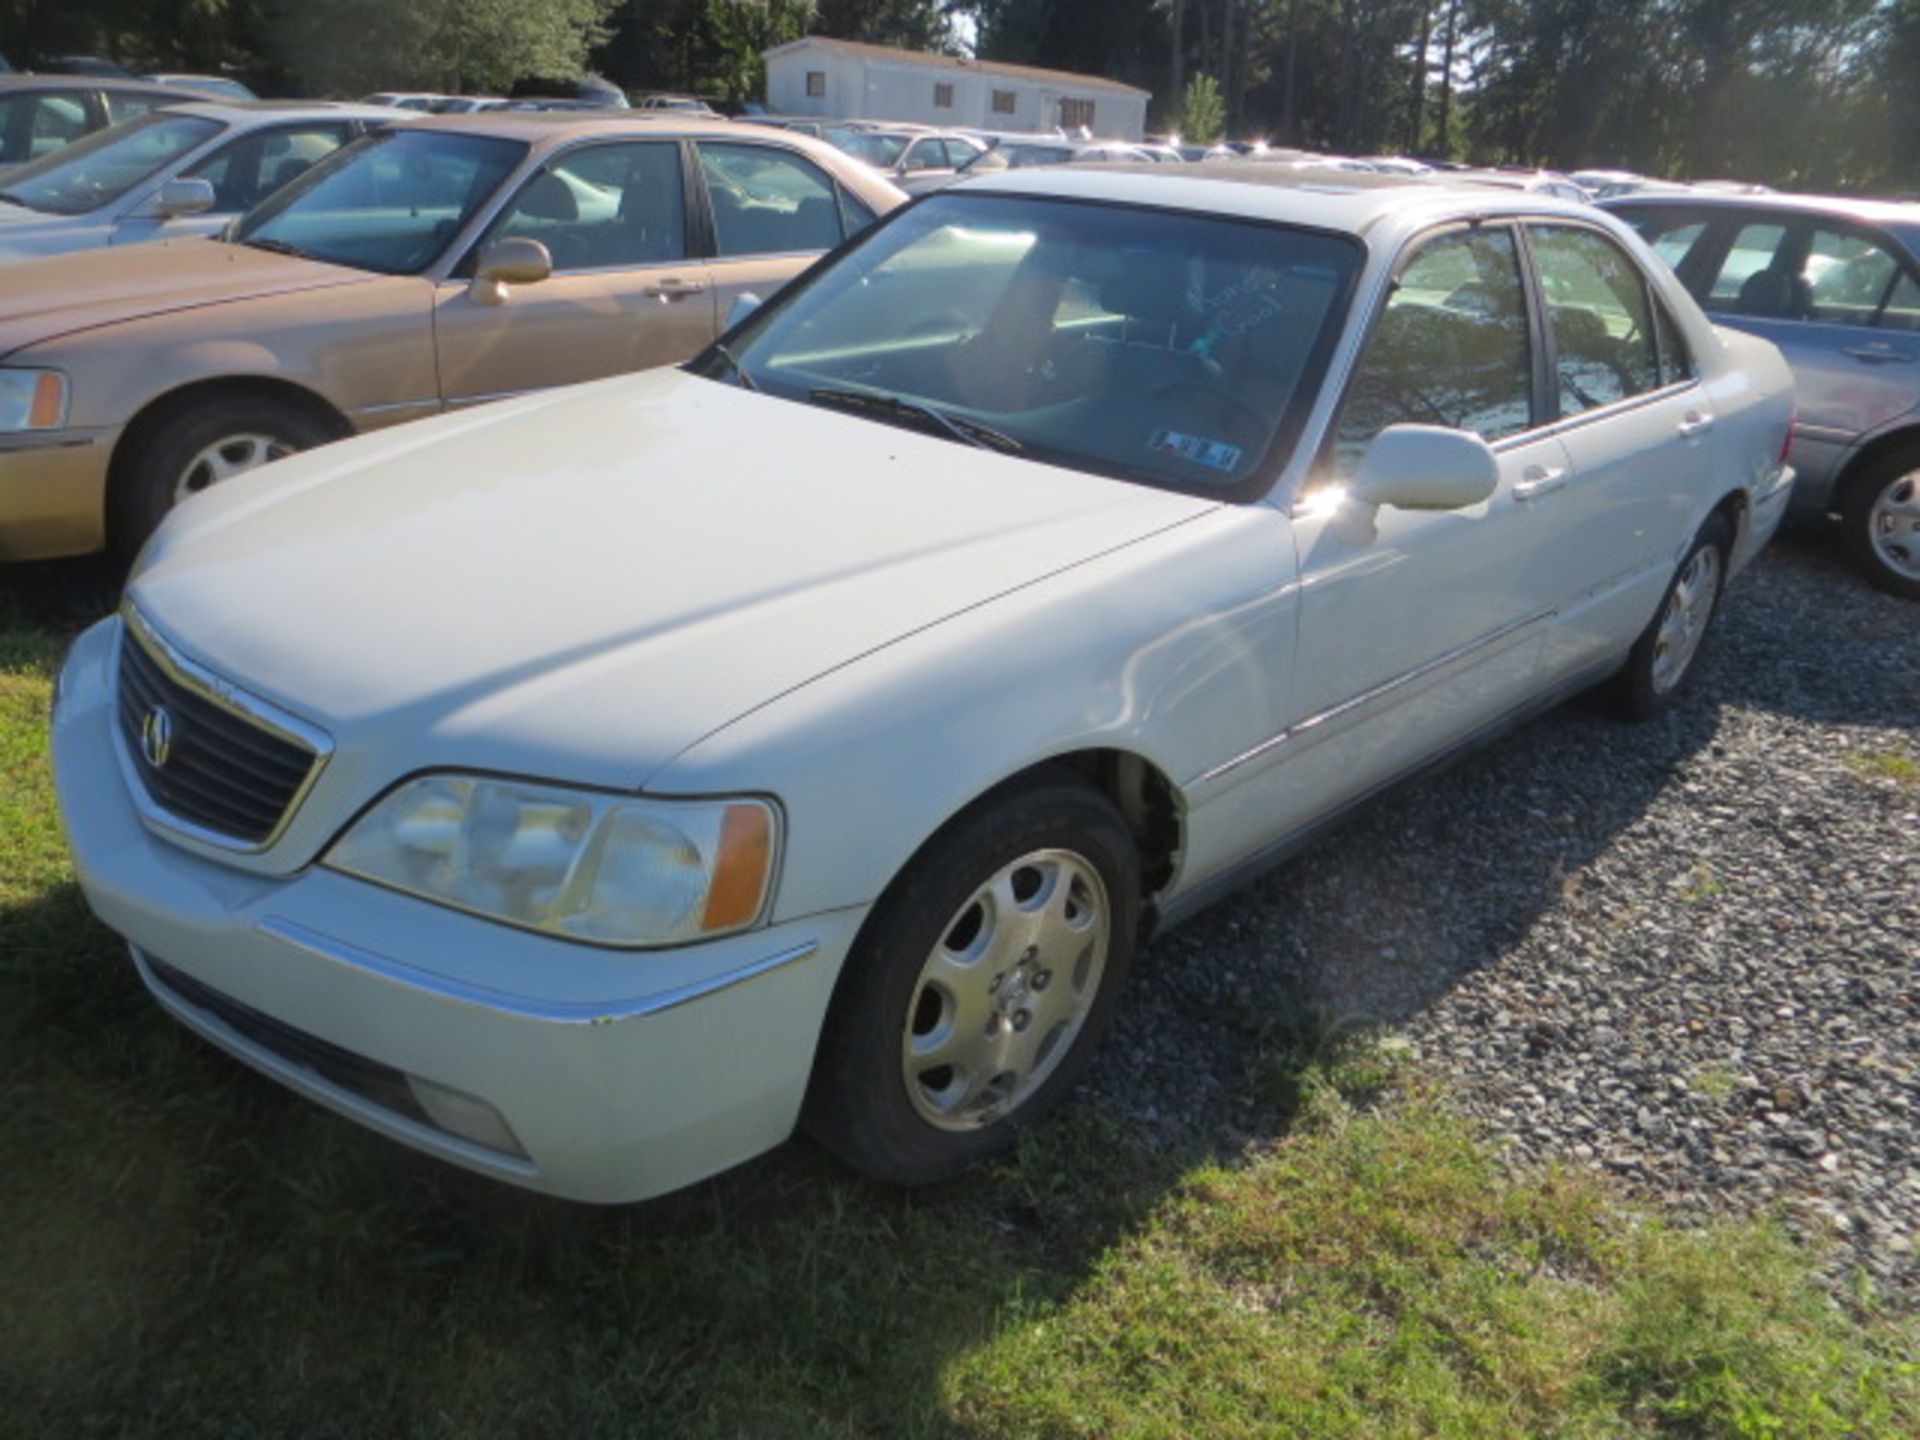 1999 Acura RL- 256000 MILES,VIN JH4KA9653XC008615, VEHICLE BEING SOLD WITH SALVAGE TITLE AND A 30 DA - Image 2 of 3